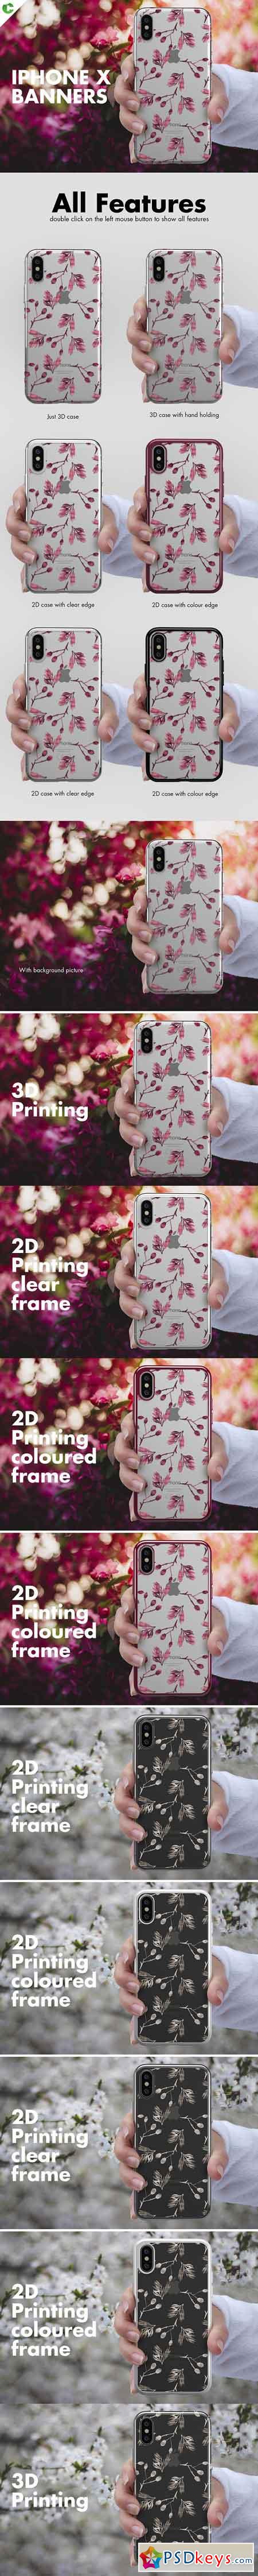 iPhone X Case Banners Mock-up vs1 2602462